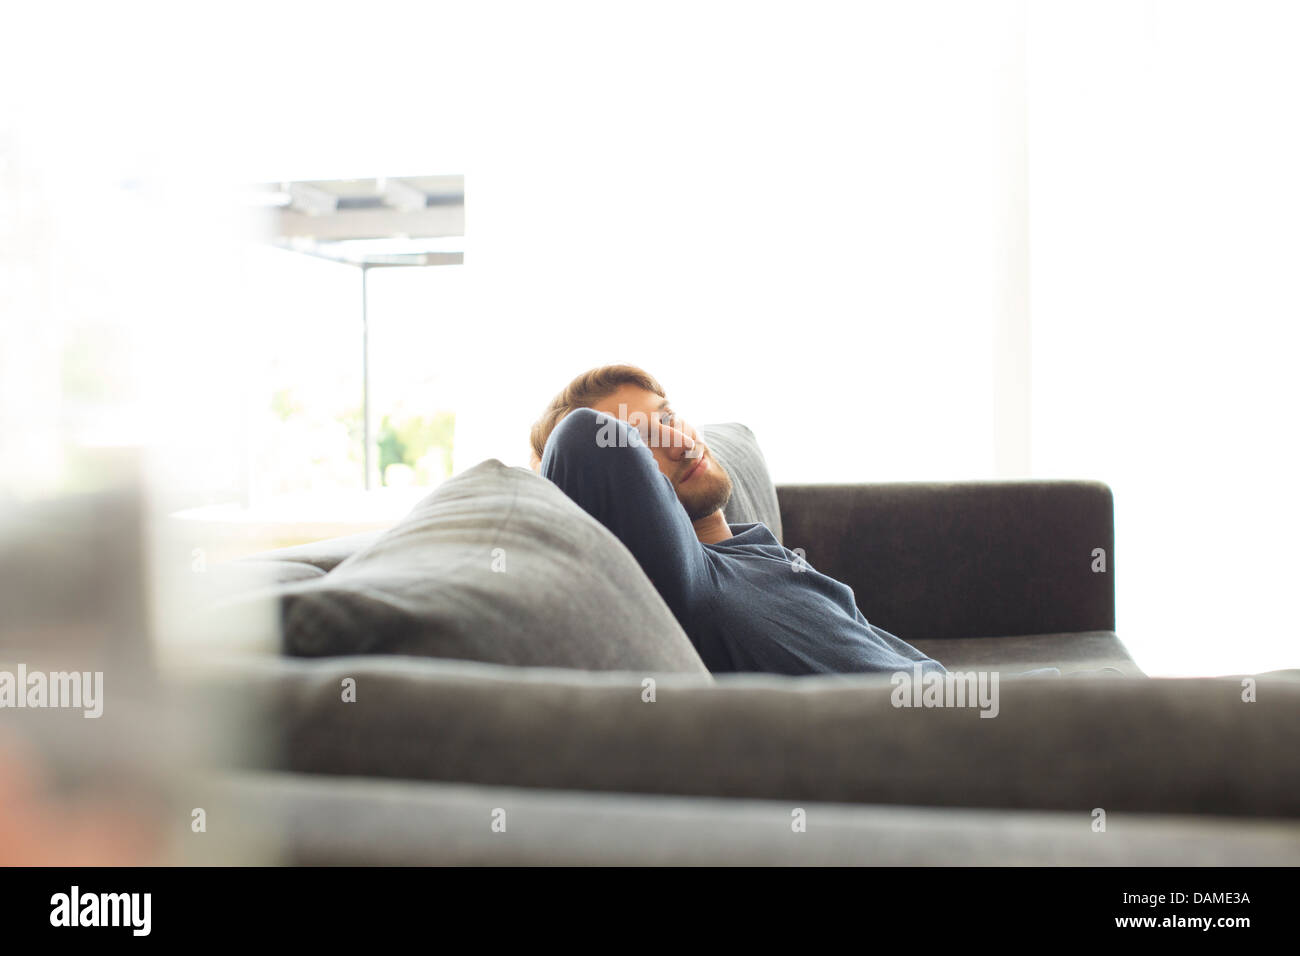 Smiling man relaxing on sofa Stock Photo